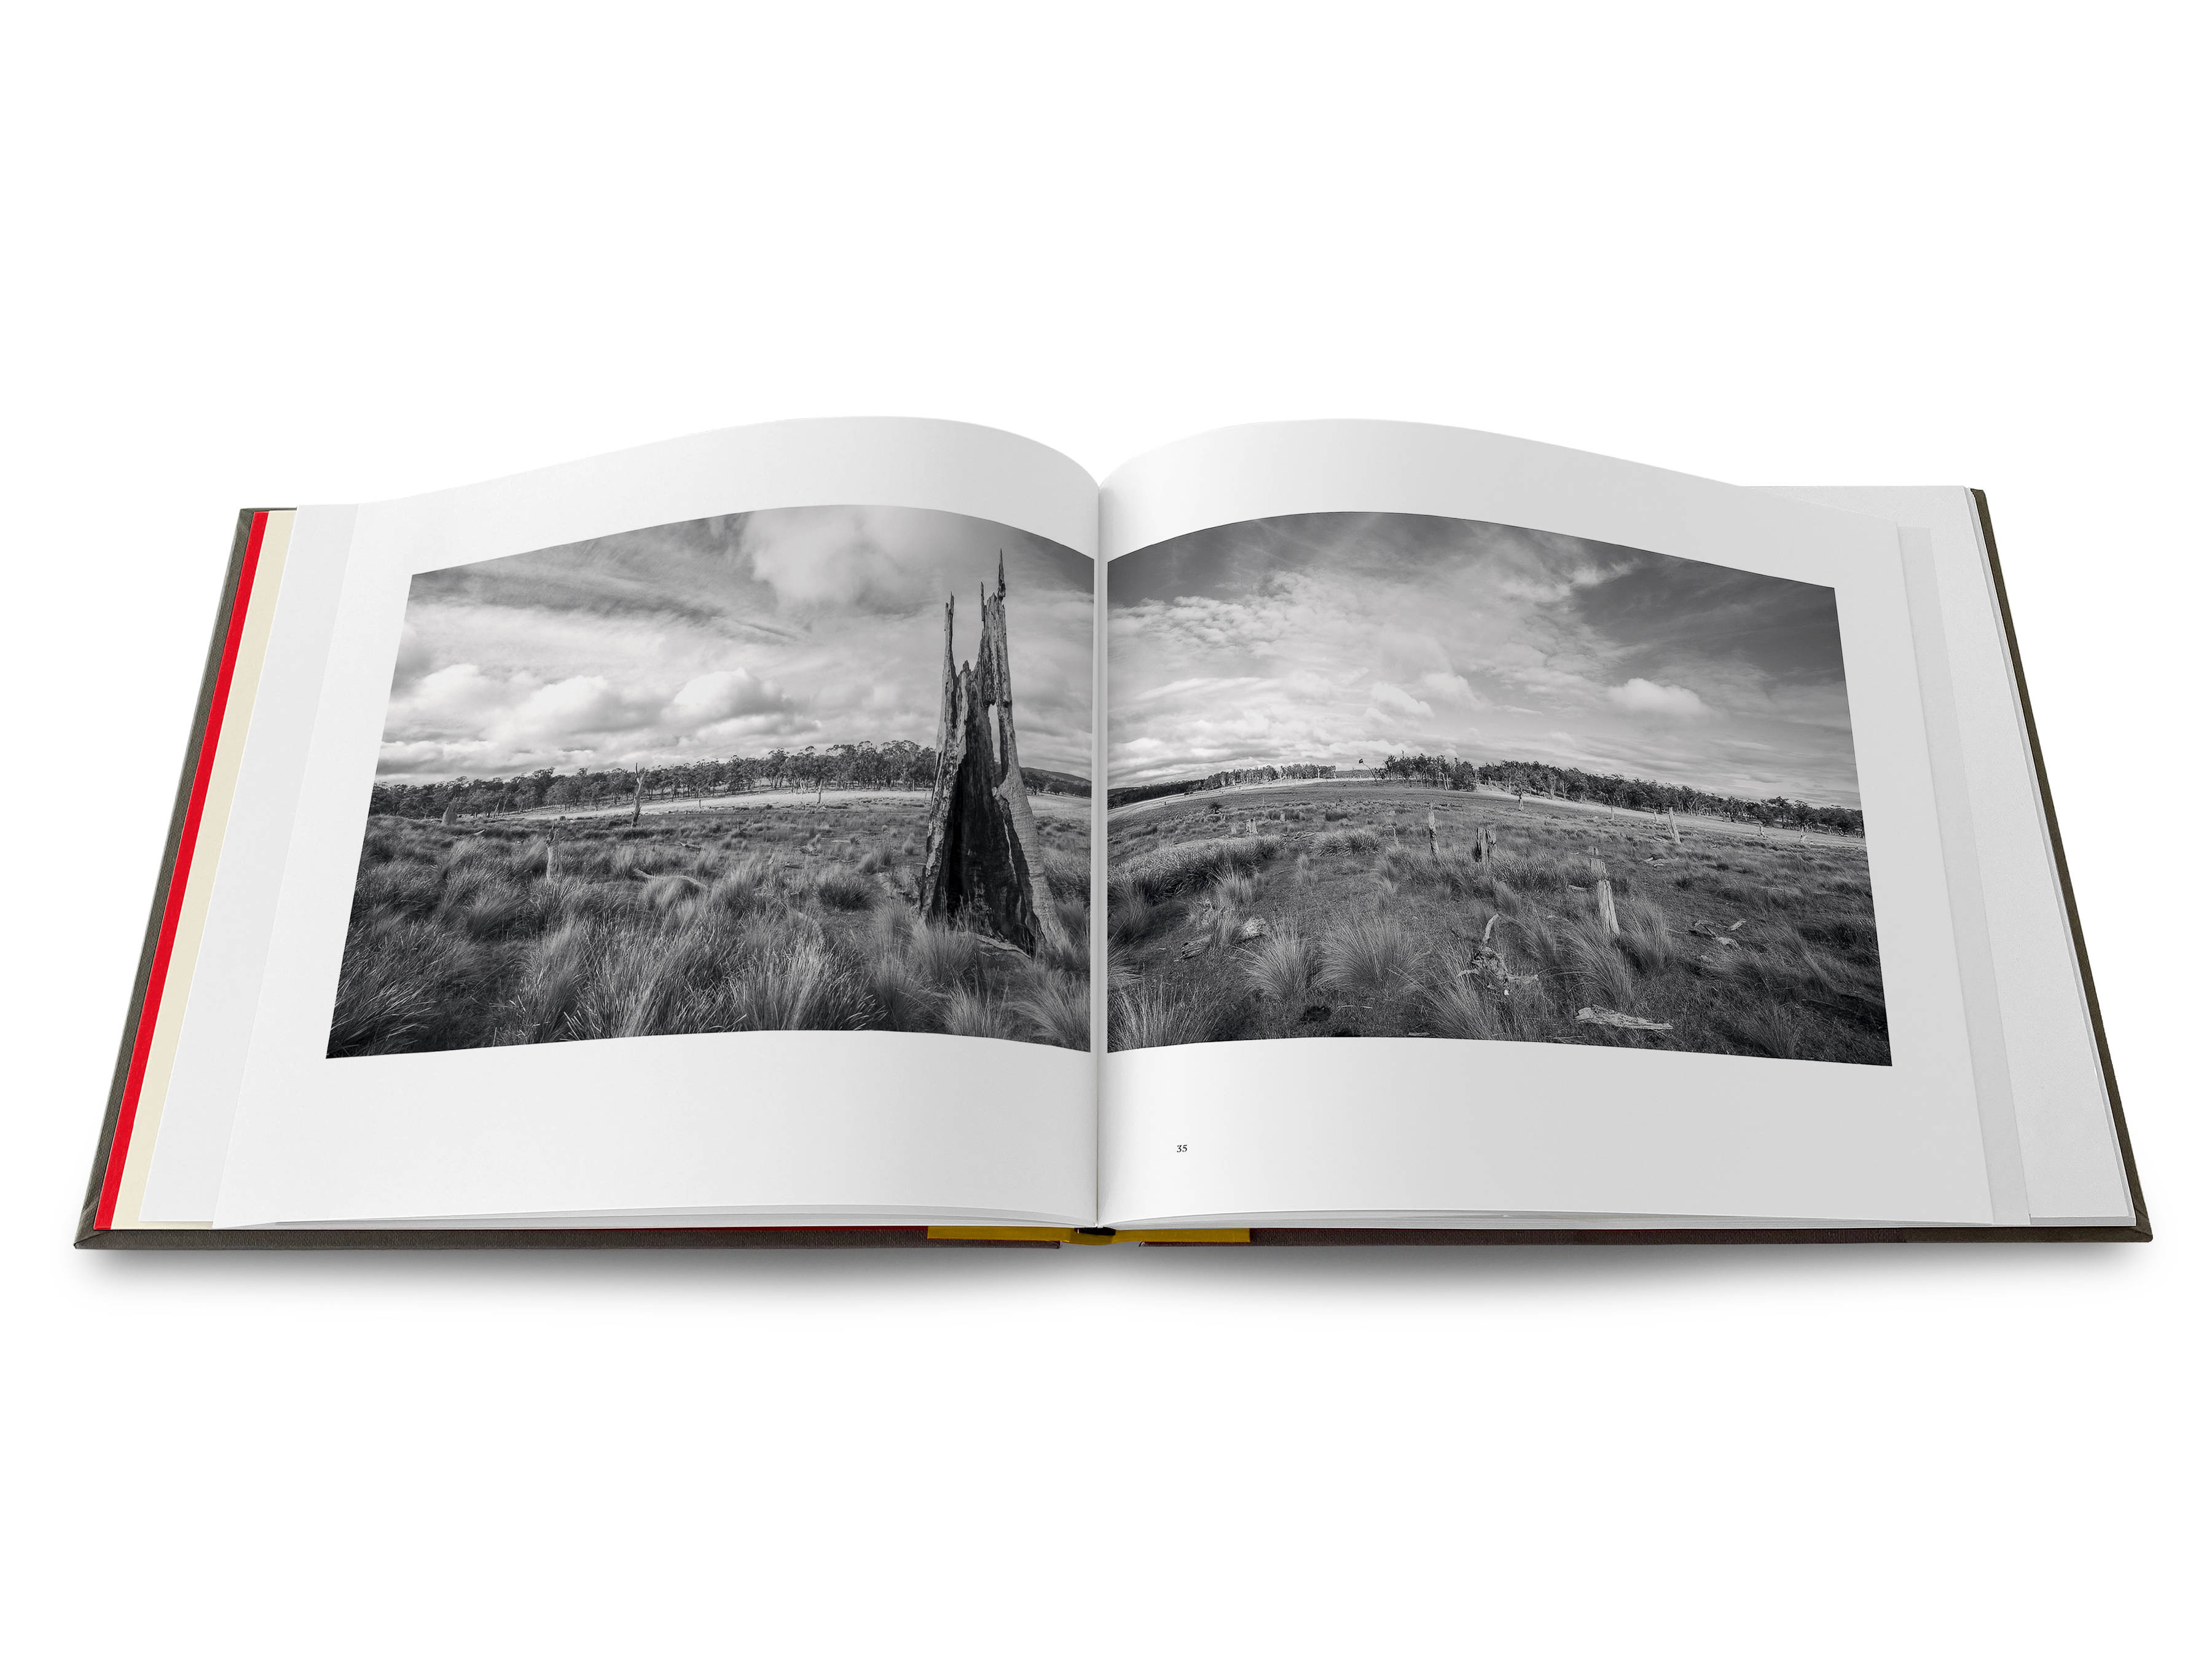 An image of a double-page spread from the Uninnocent Landscapes book with an image of a large hollow tree stump and open country.